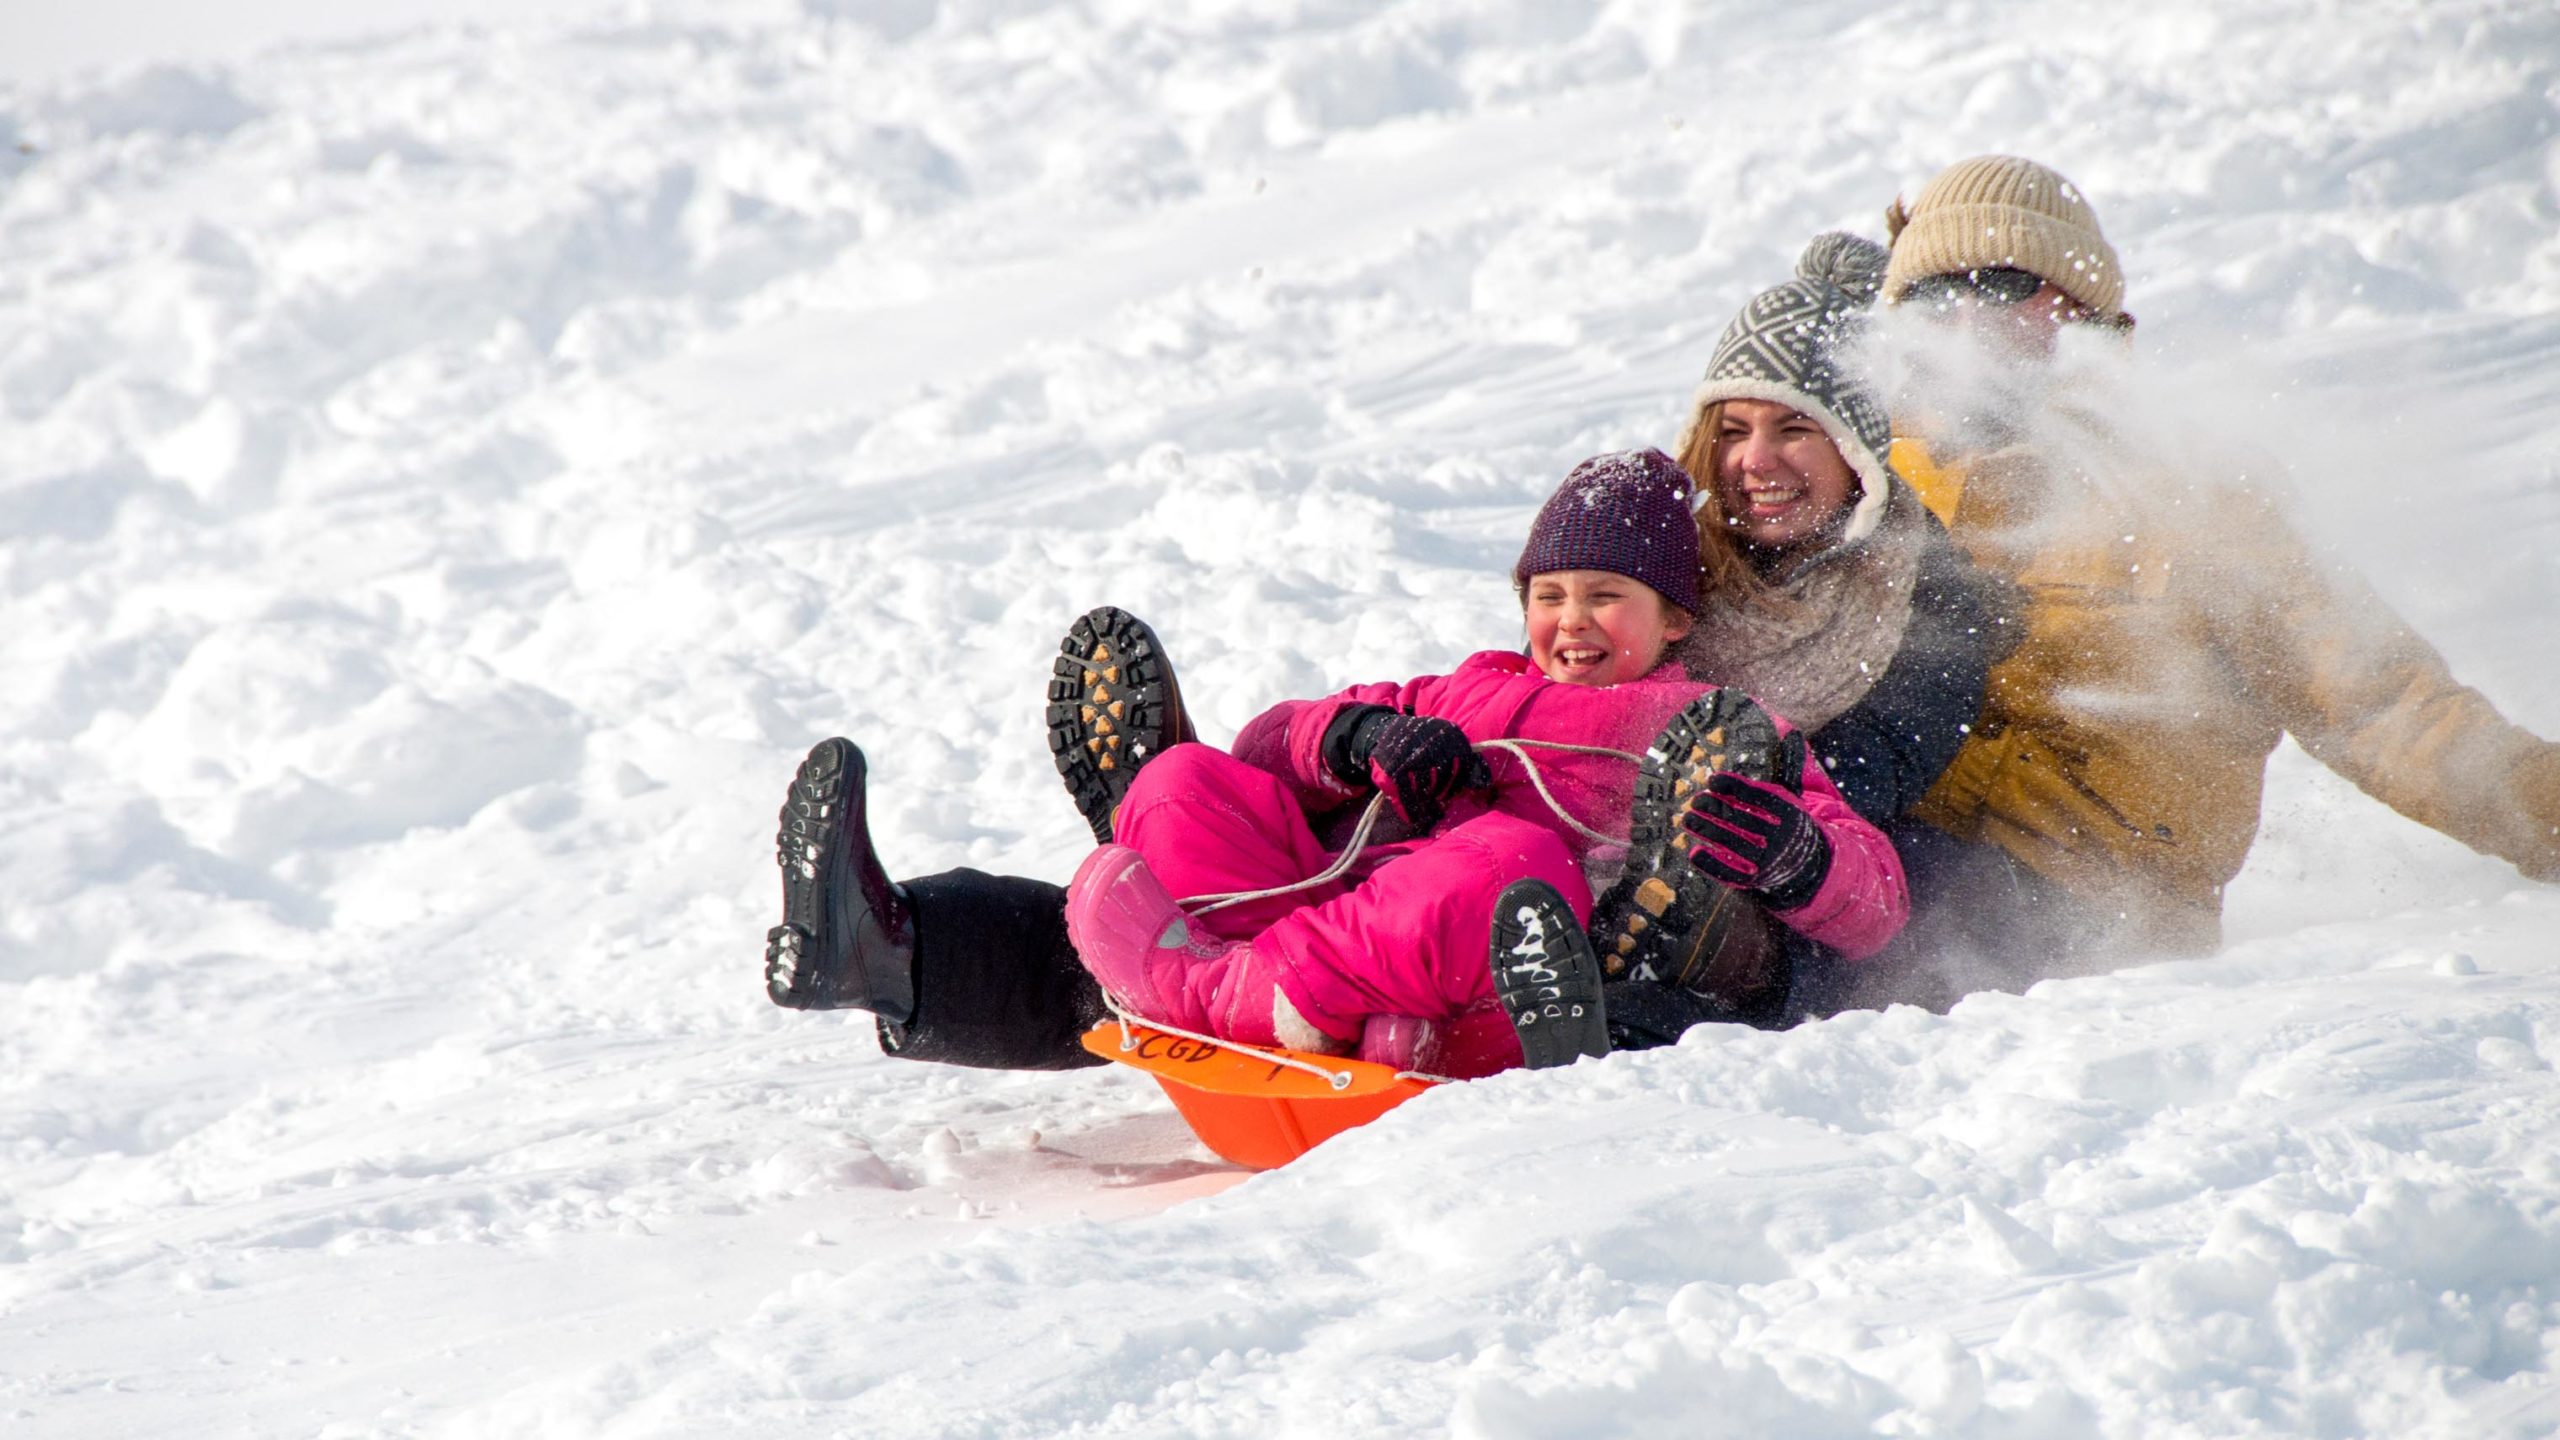 Campers laughing while sledding down a hill.